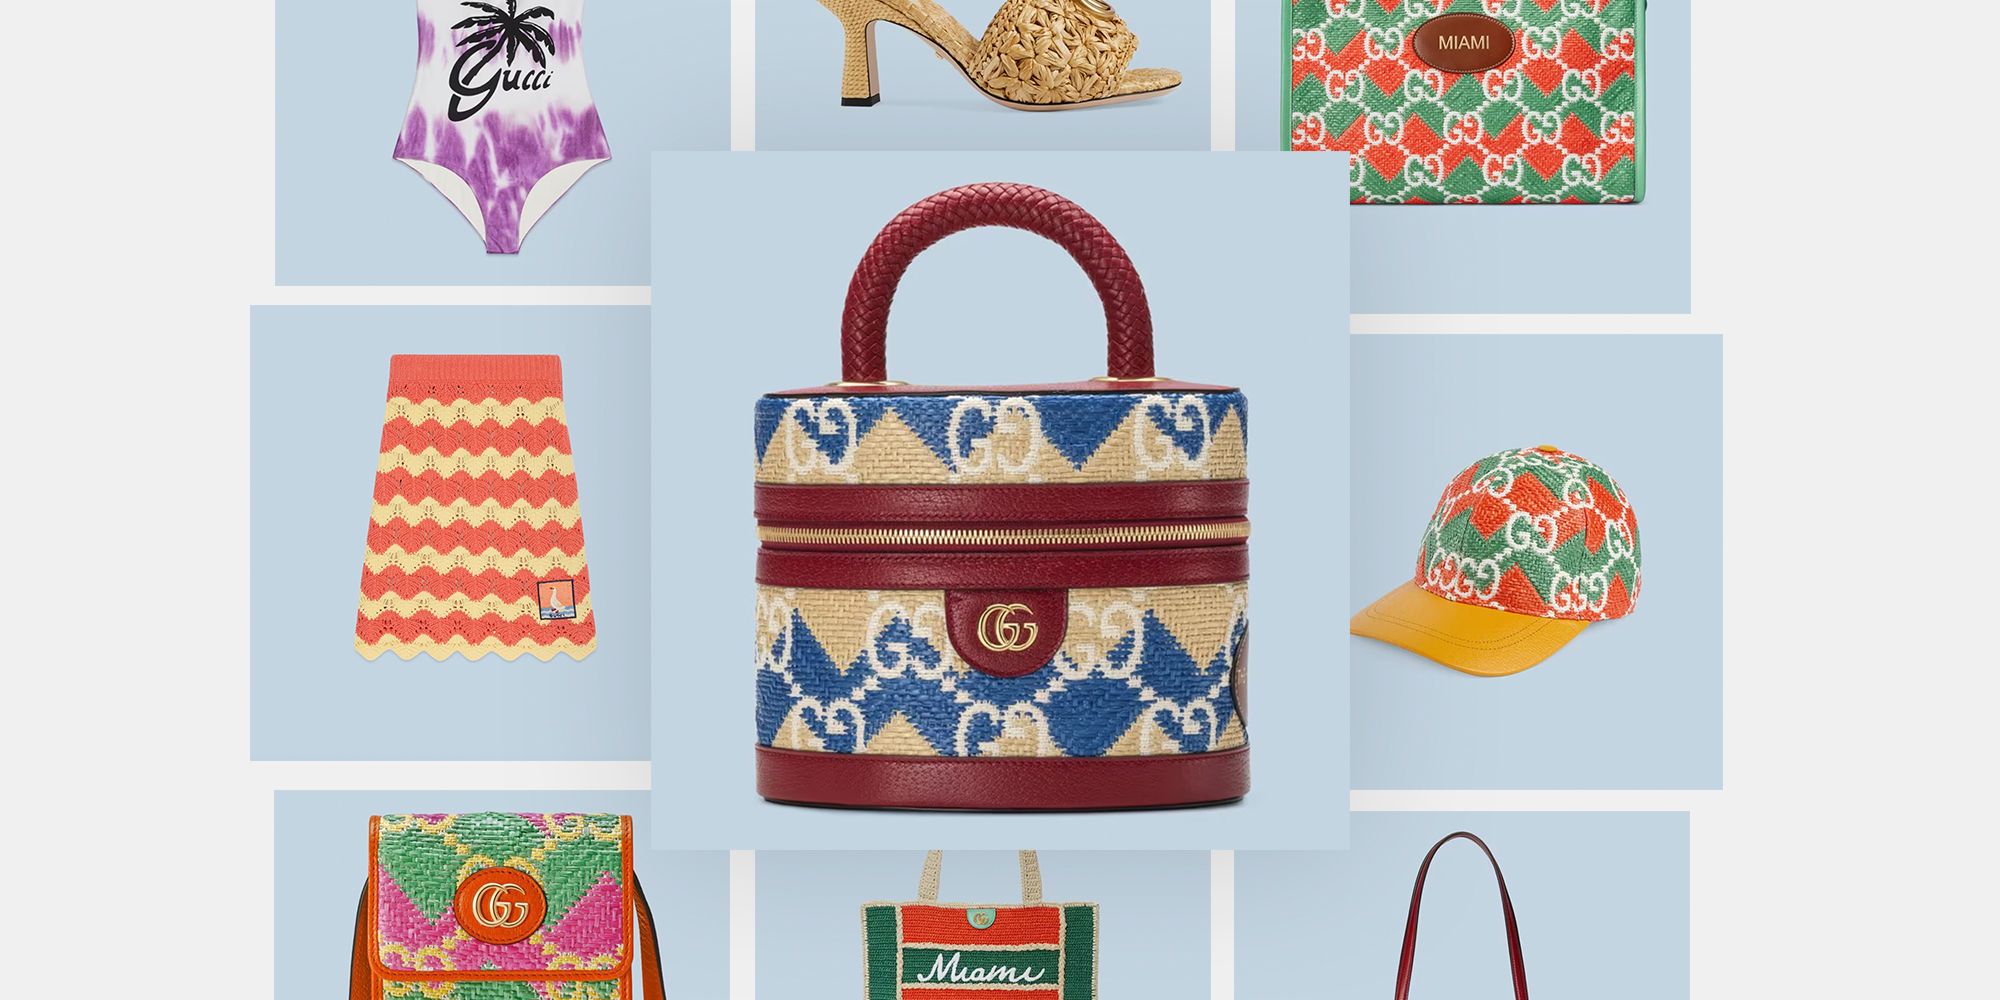 Gucci Made the Least Touristy Travel Accessories You've Seen in a Minute